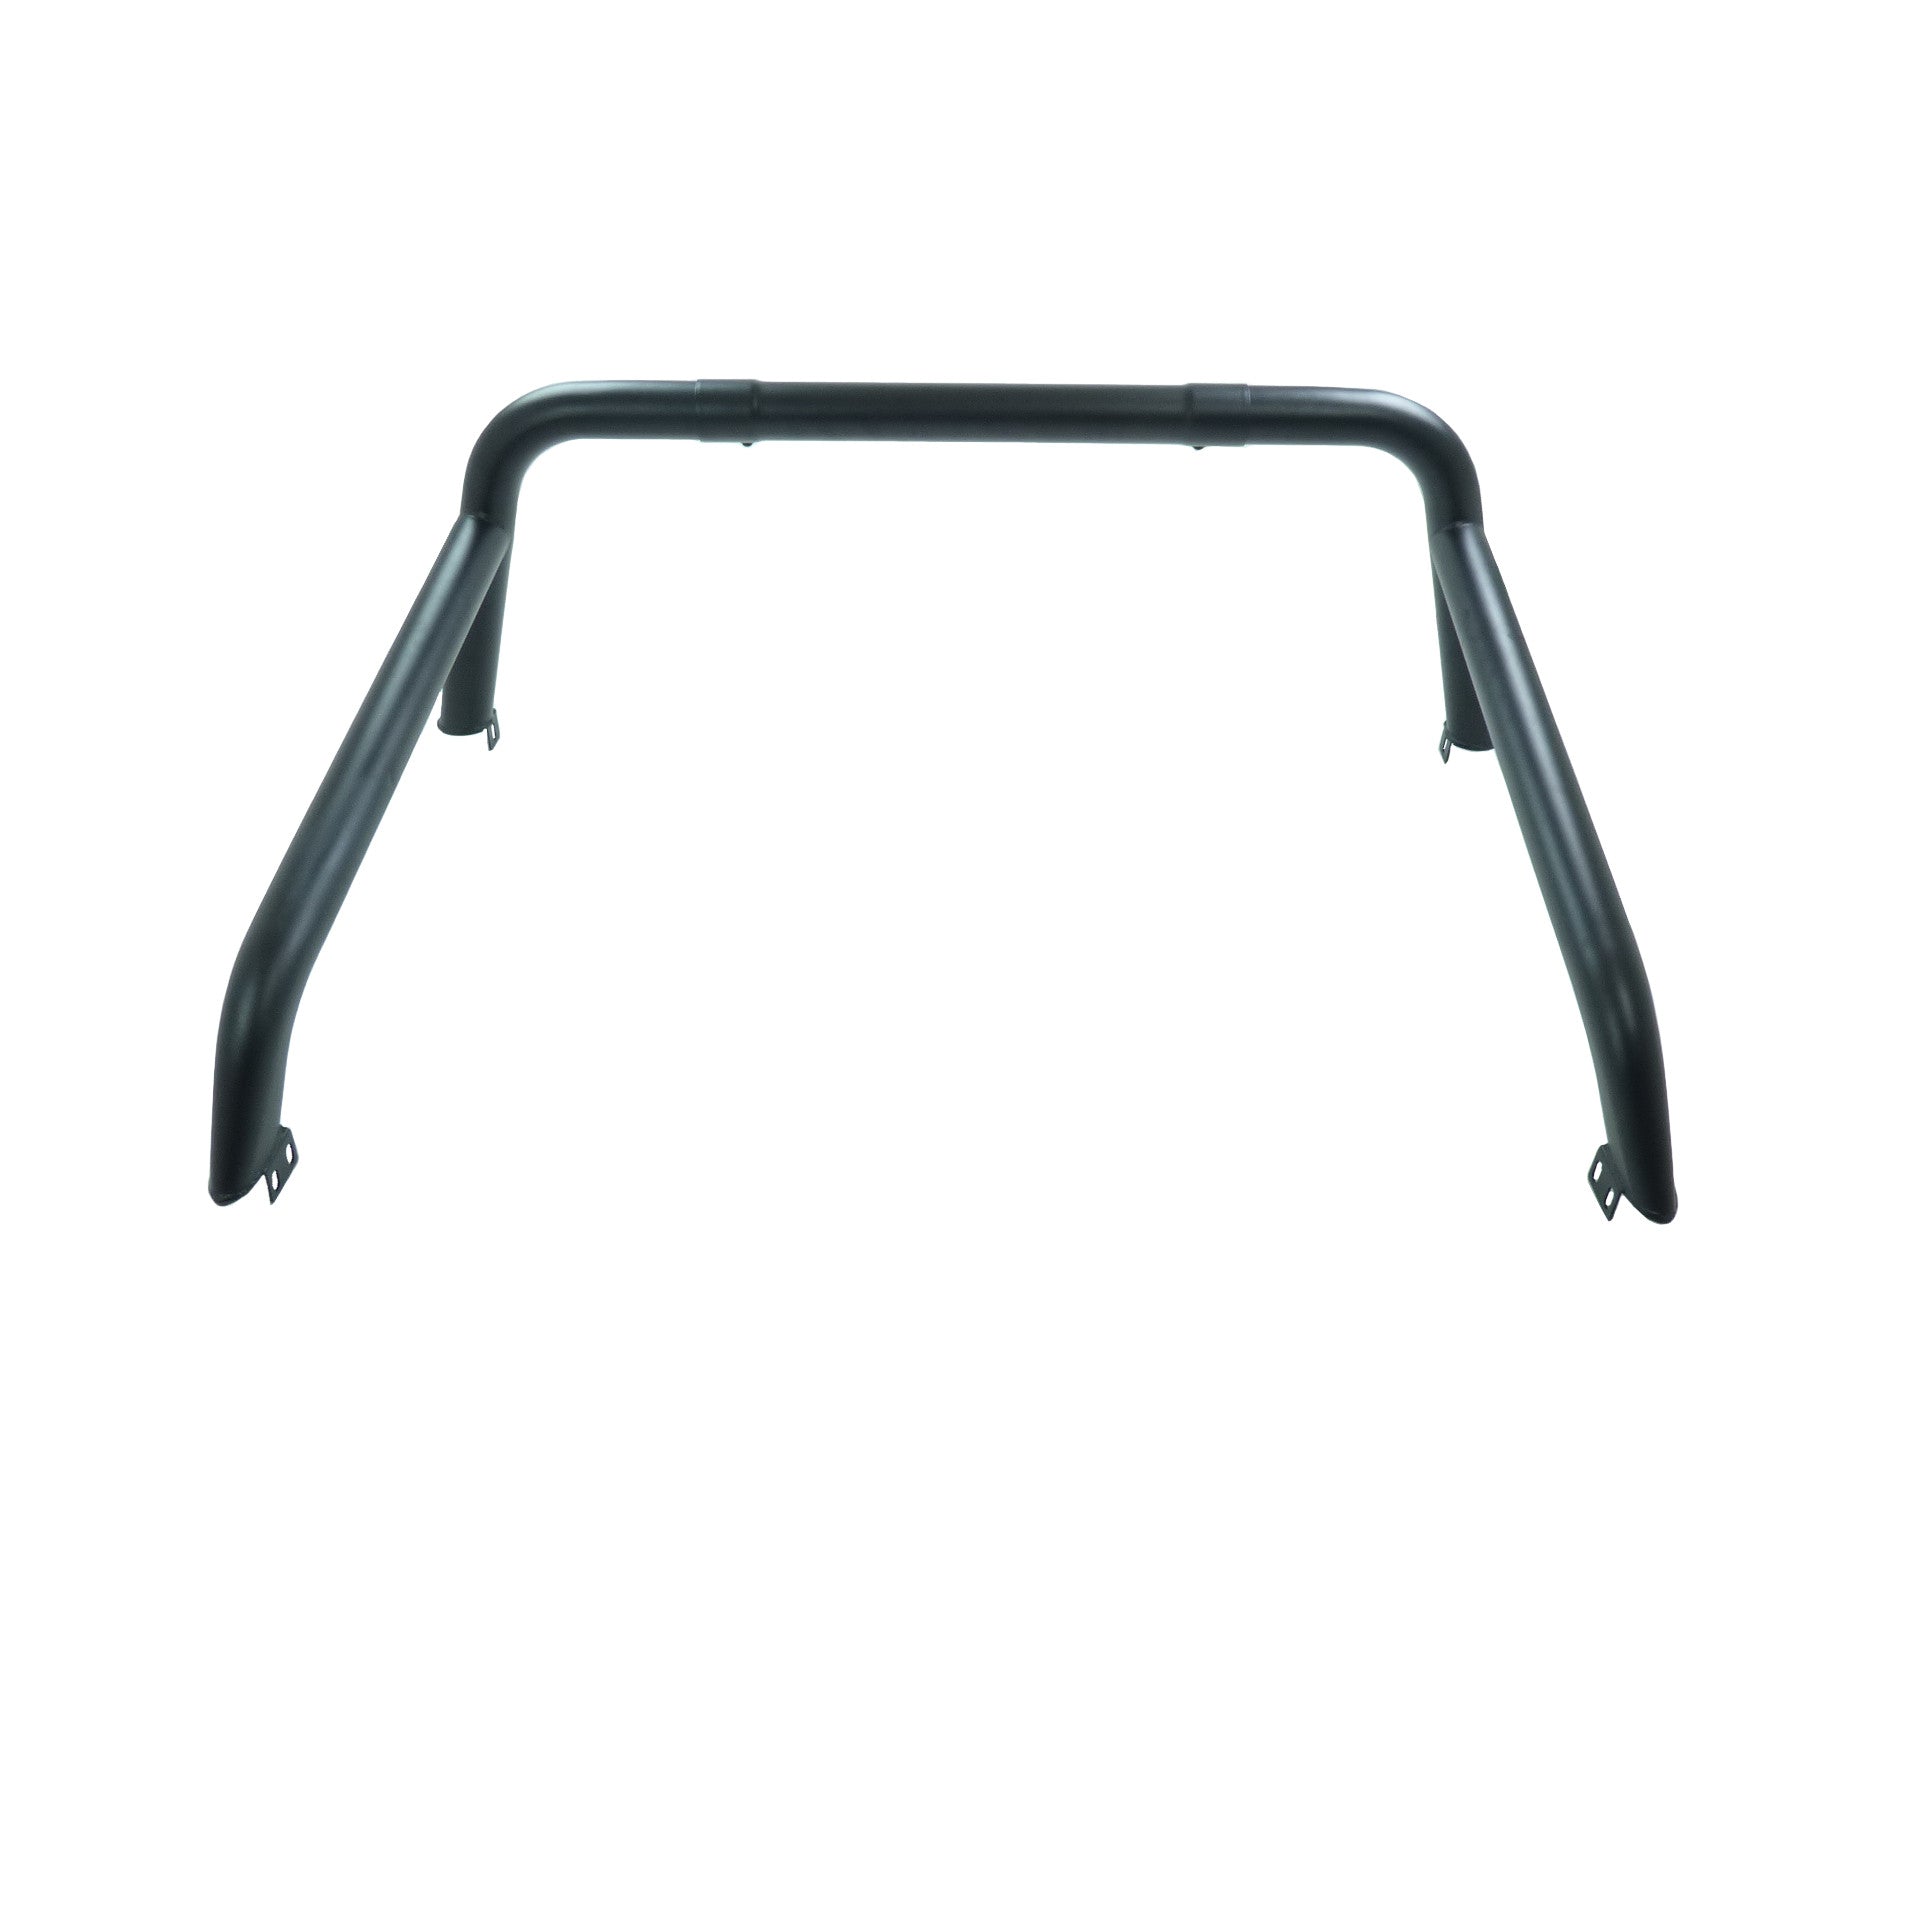 Single Loop Black Powder Coated Roll Sports Bar for Mitsubishi L200 2005-2010 -  - sold by Direct4x4